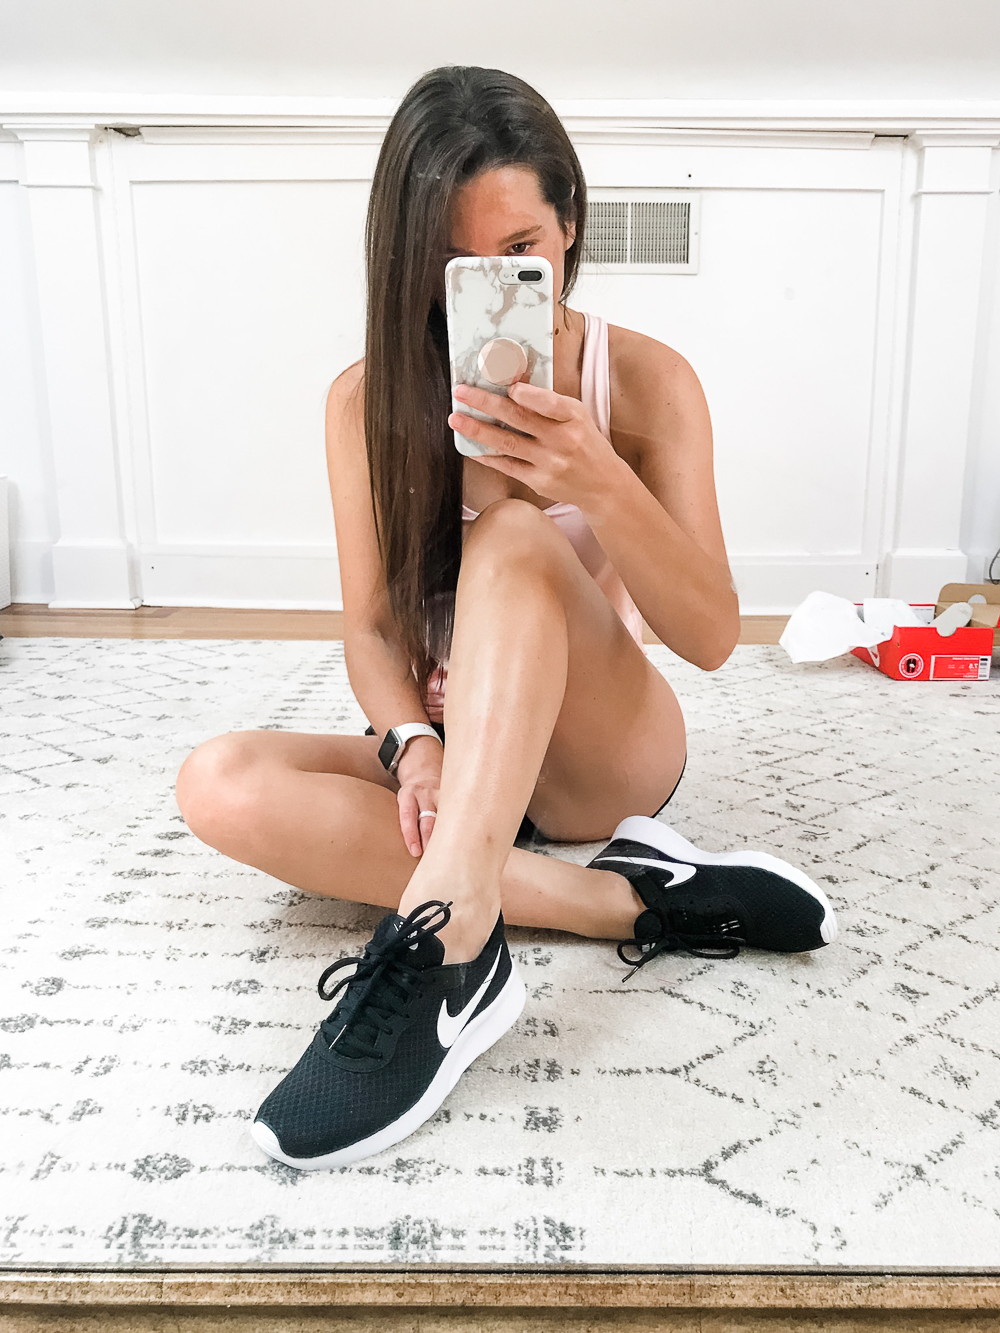 Nike Tanjun Running Shoes in Black and White, Amazon Prime Day Try-On Haul: Top Affordable Fashion Finds